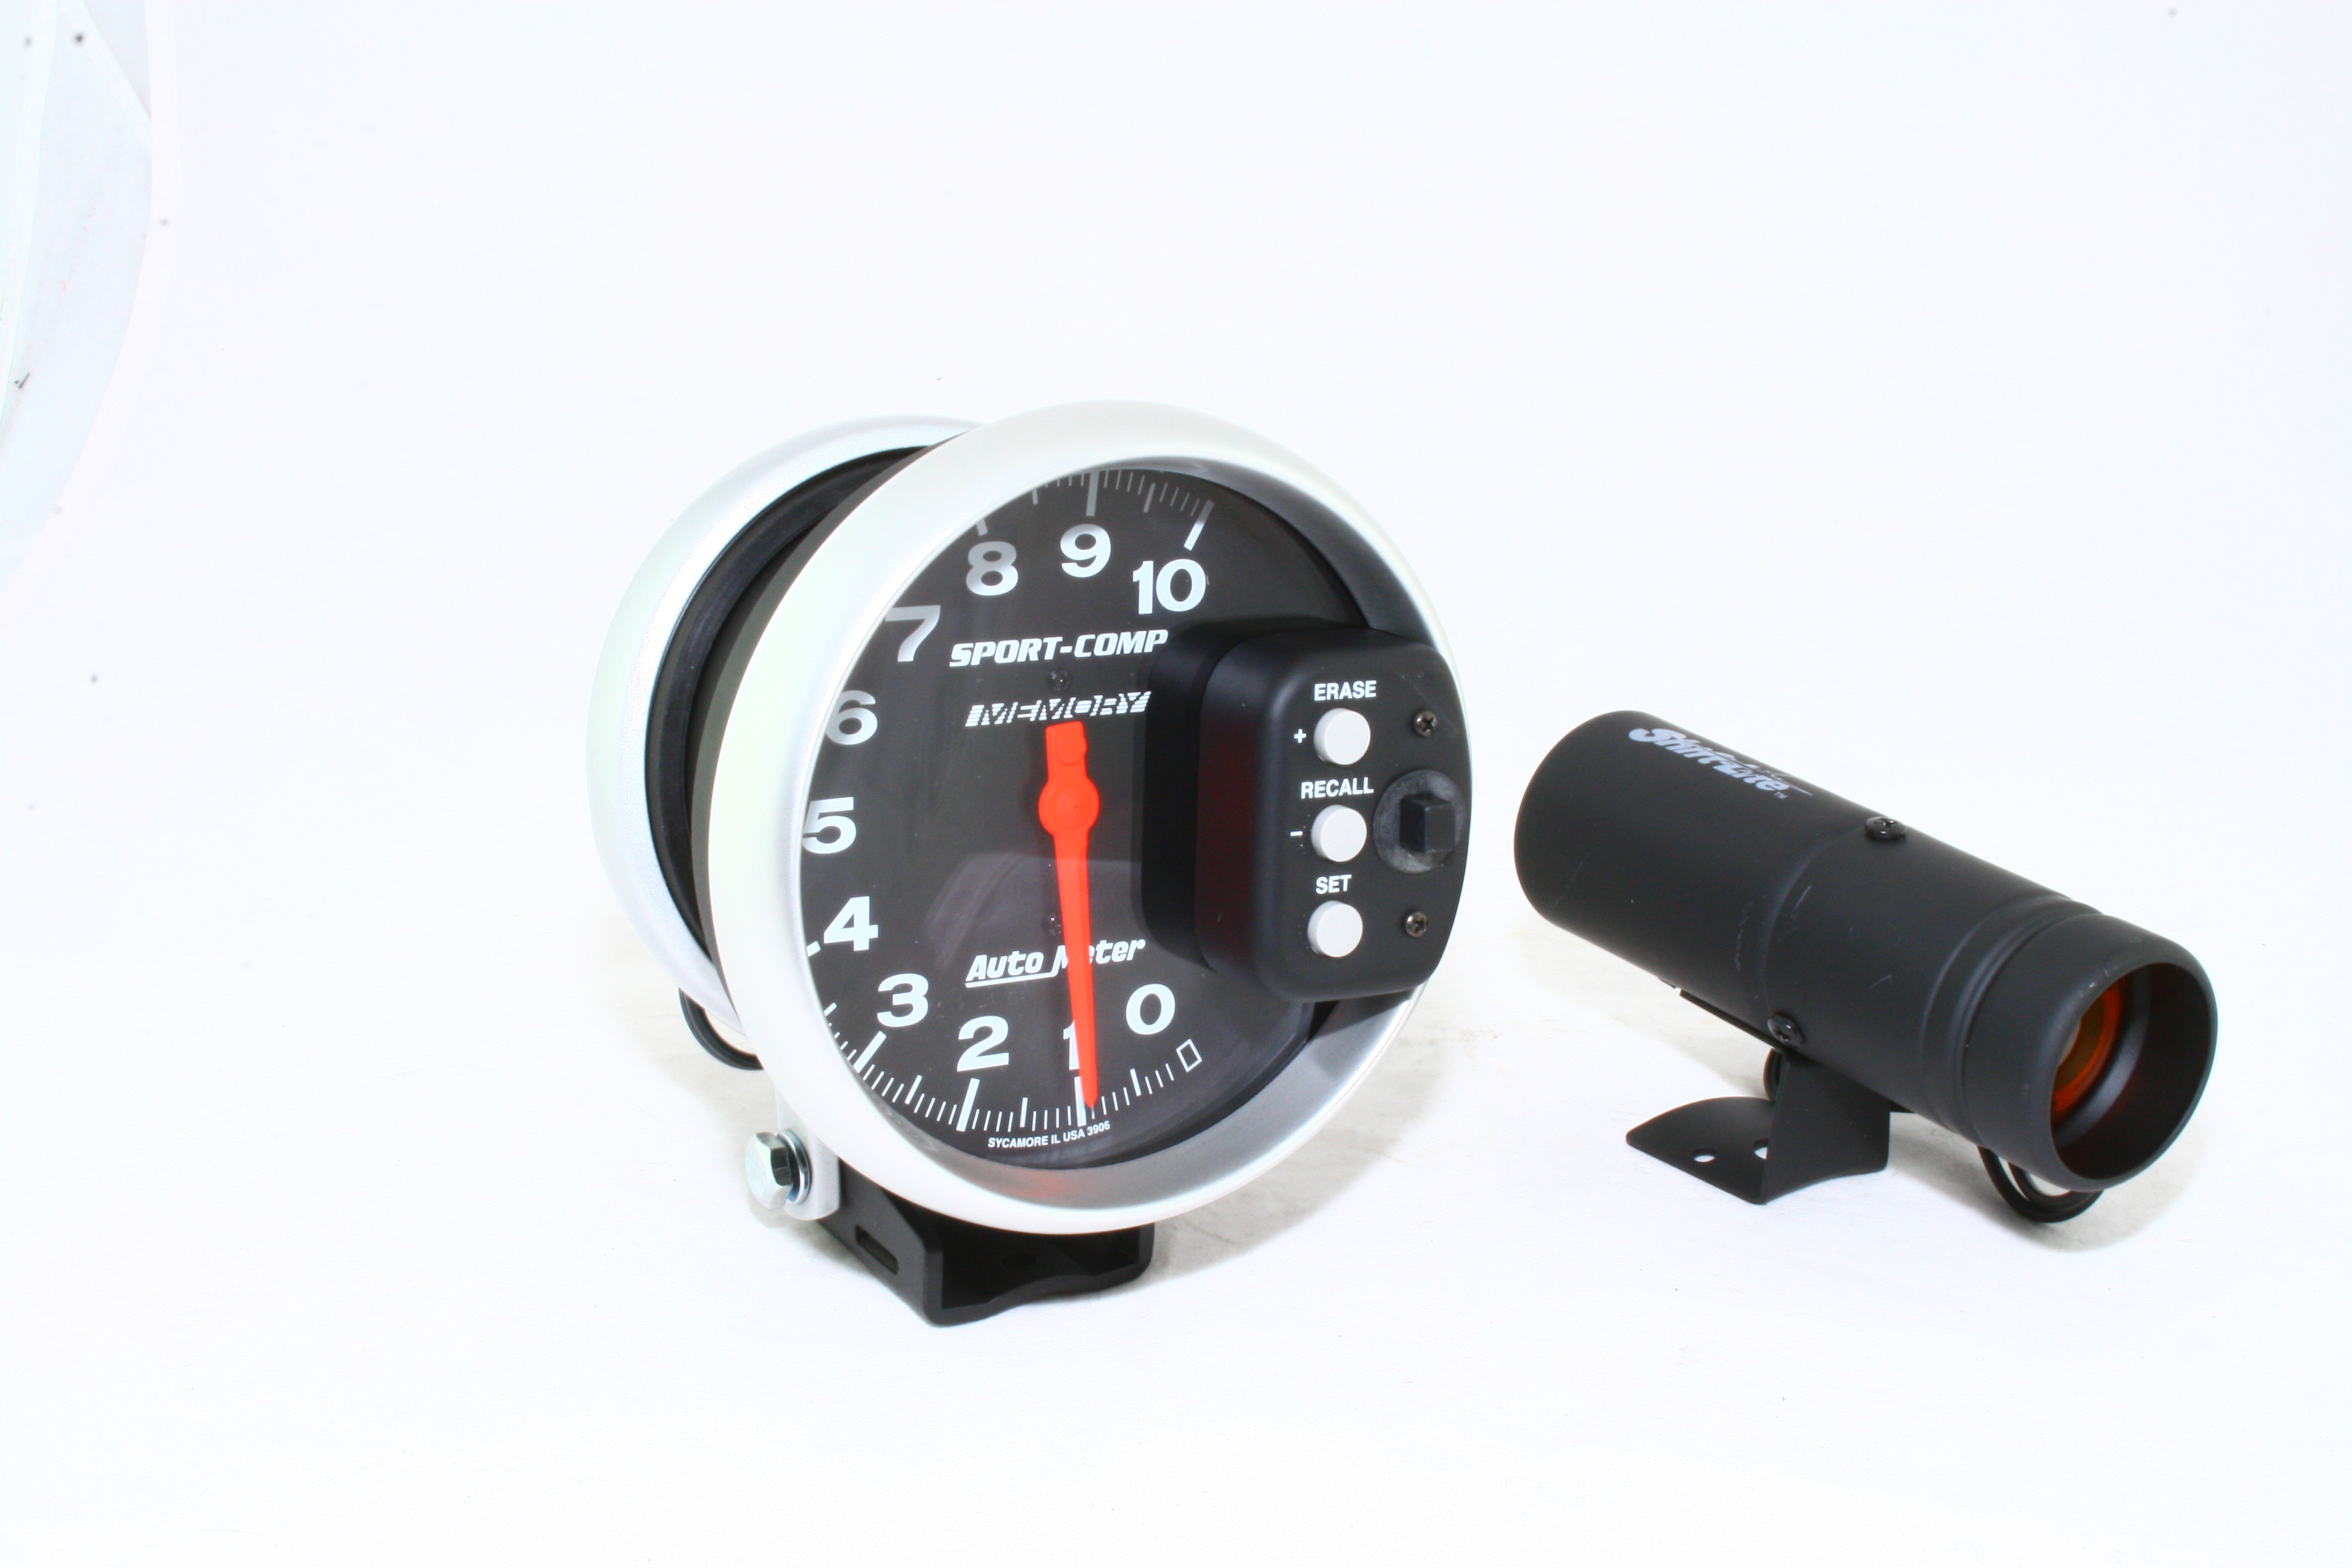 Autometer 5" dia.  10 000 rpm. Med stor Shift-lampa + memory recall